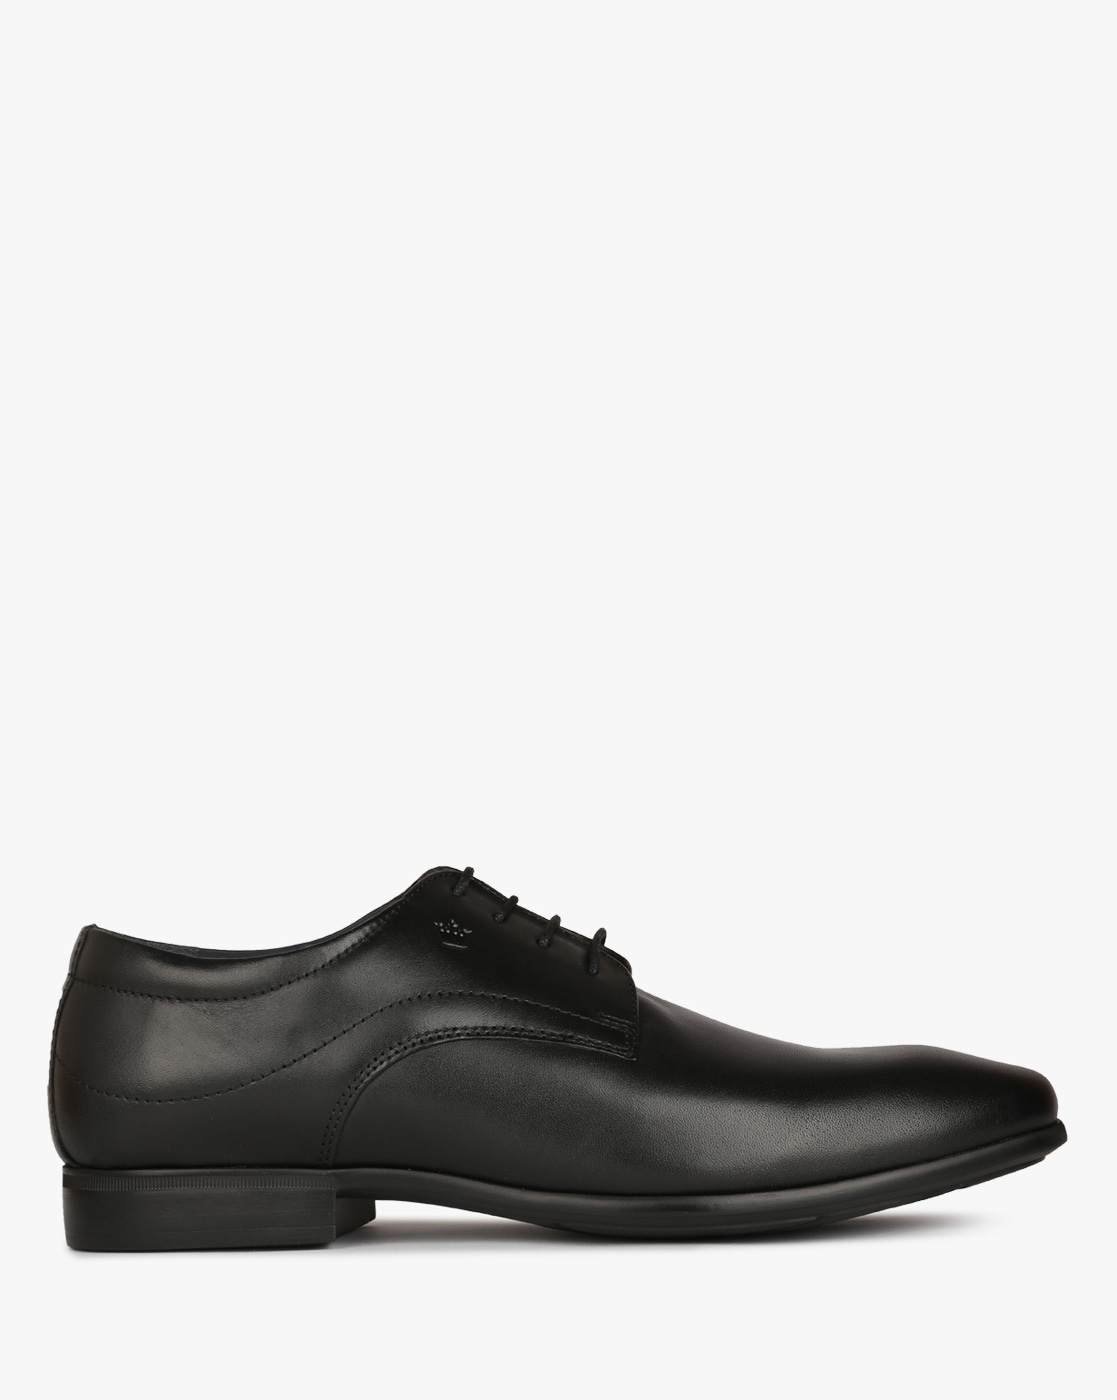 Buy Black Formal Shoes for Men by LOUIS 